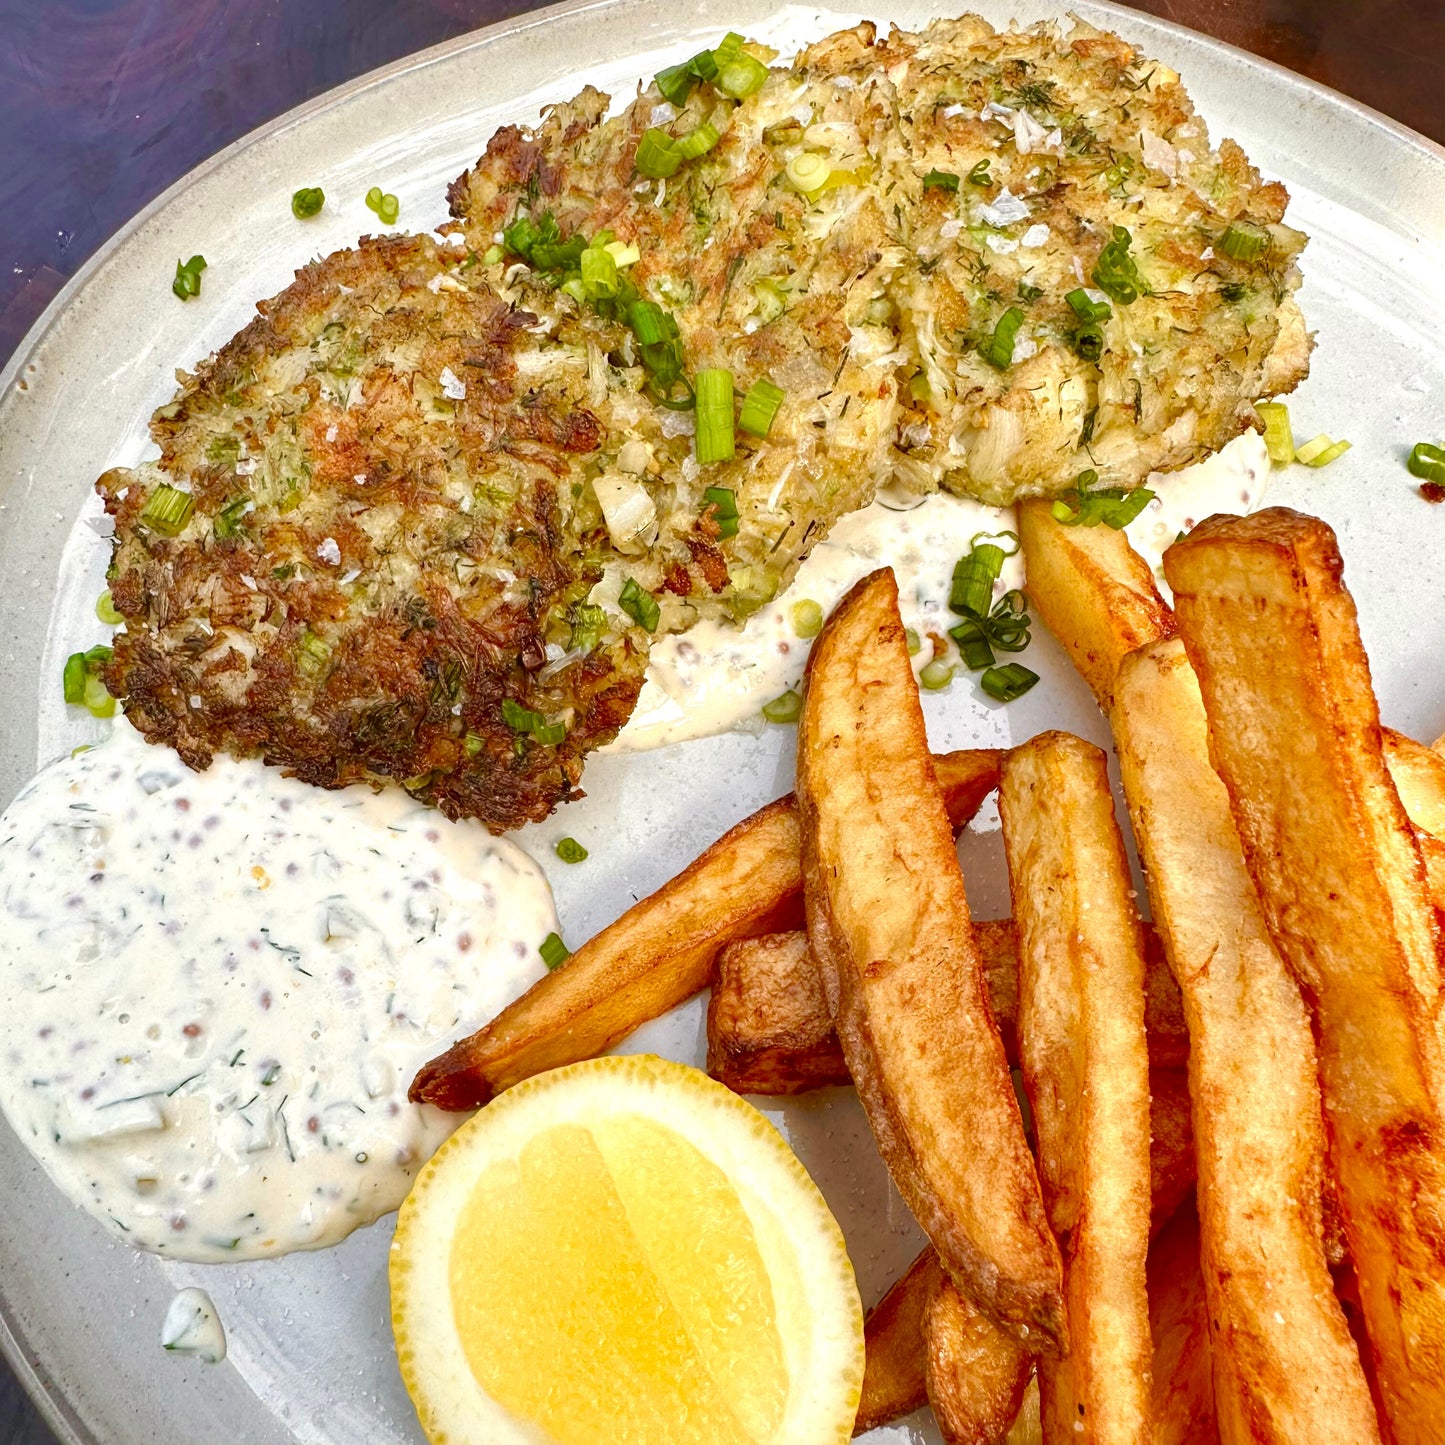 stone crab cakes made on the plancha with fries and tartar sauce